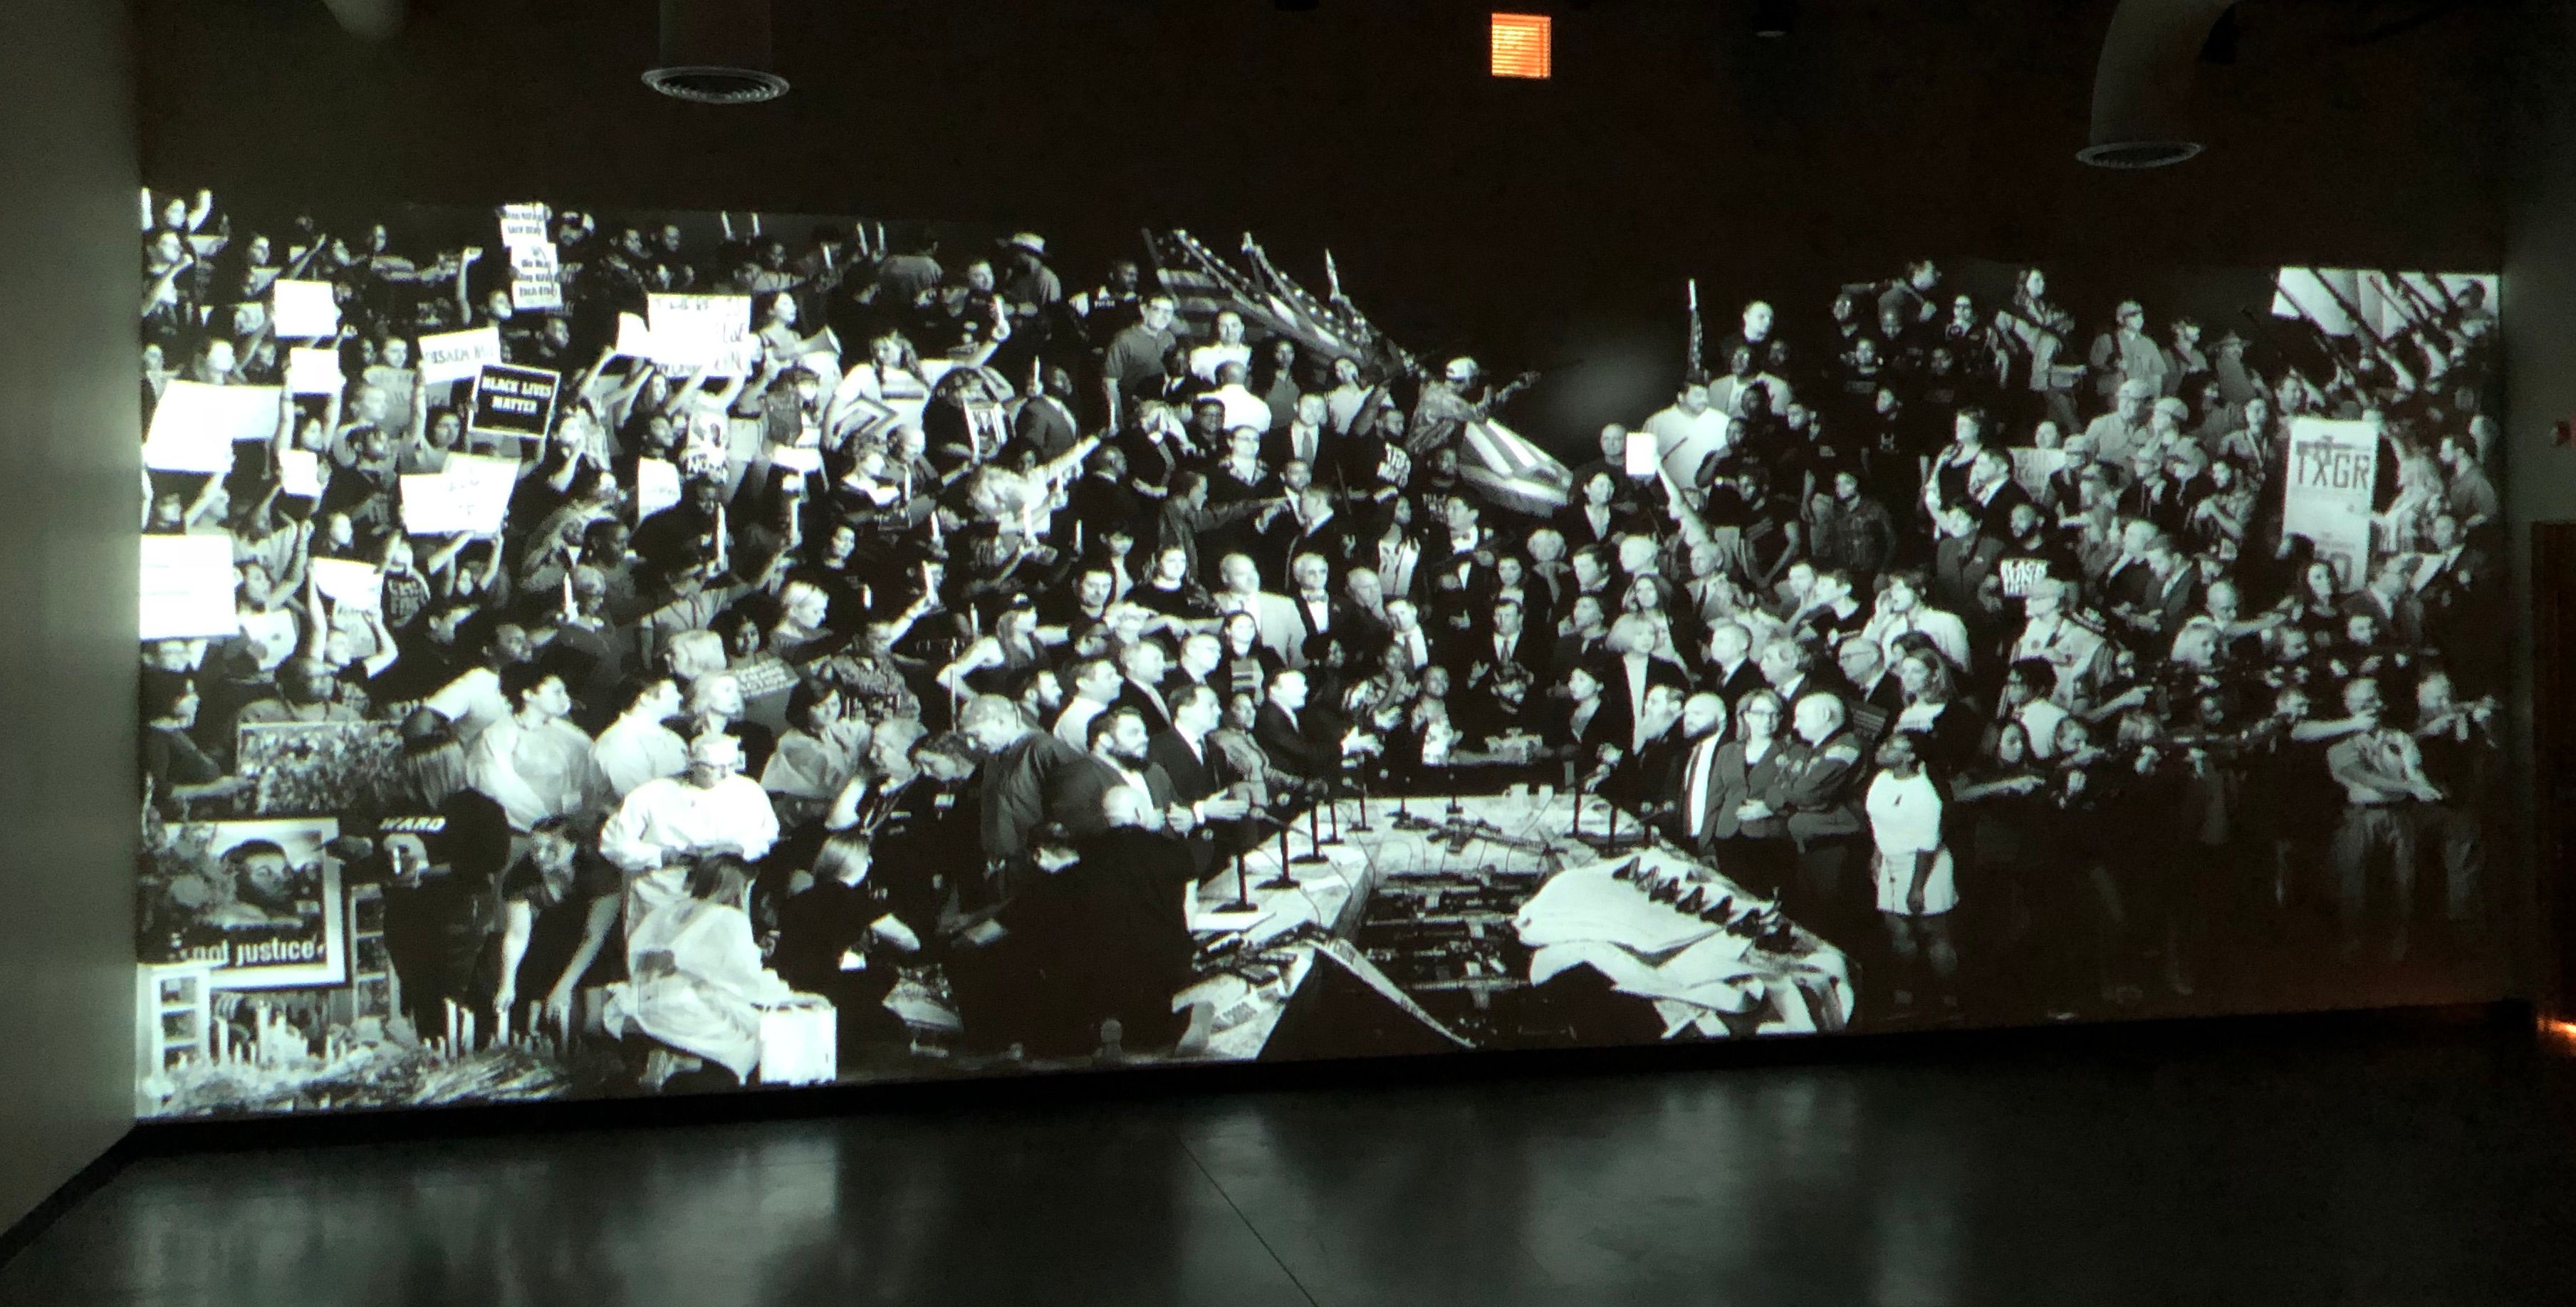 A large projection screen at a St. Louis event